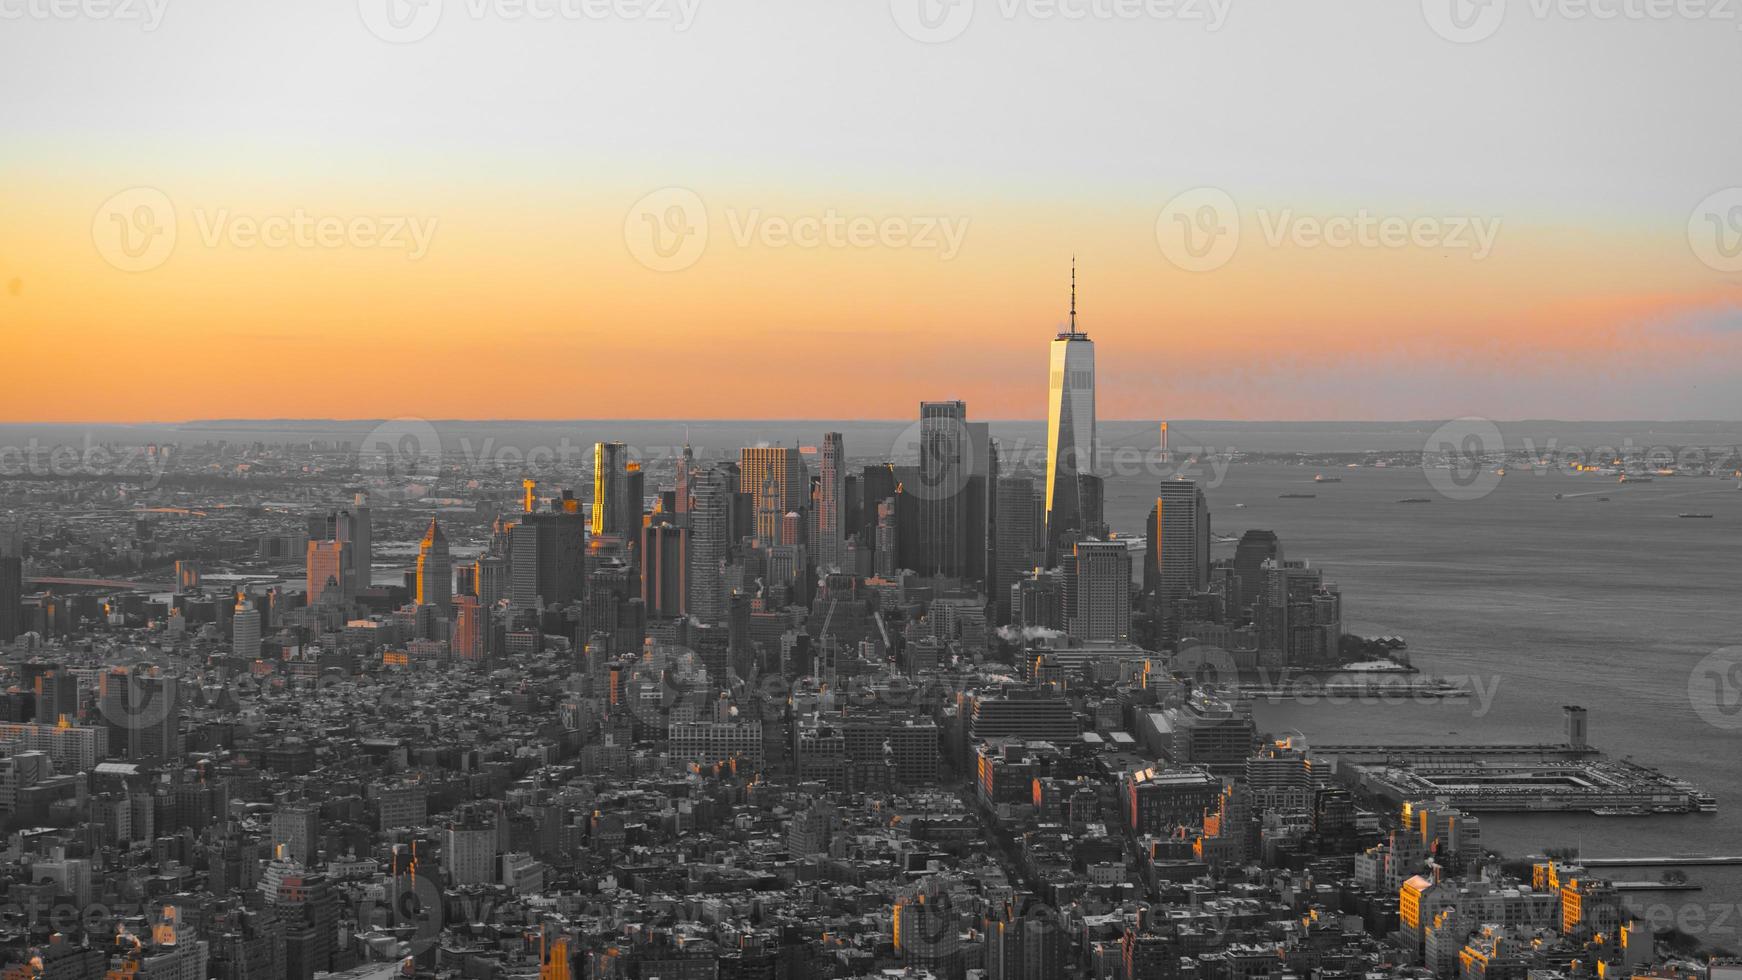 The Complete Manhattan seen during the Sunrise photo